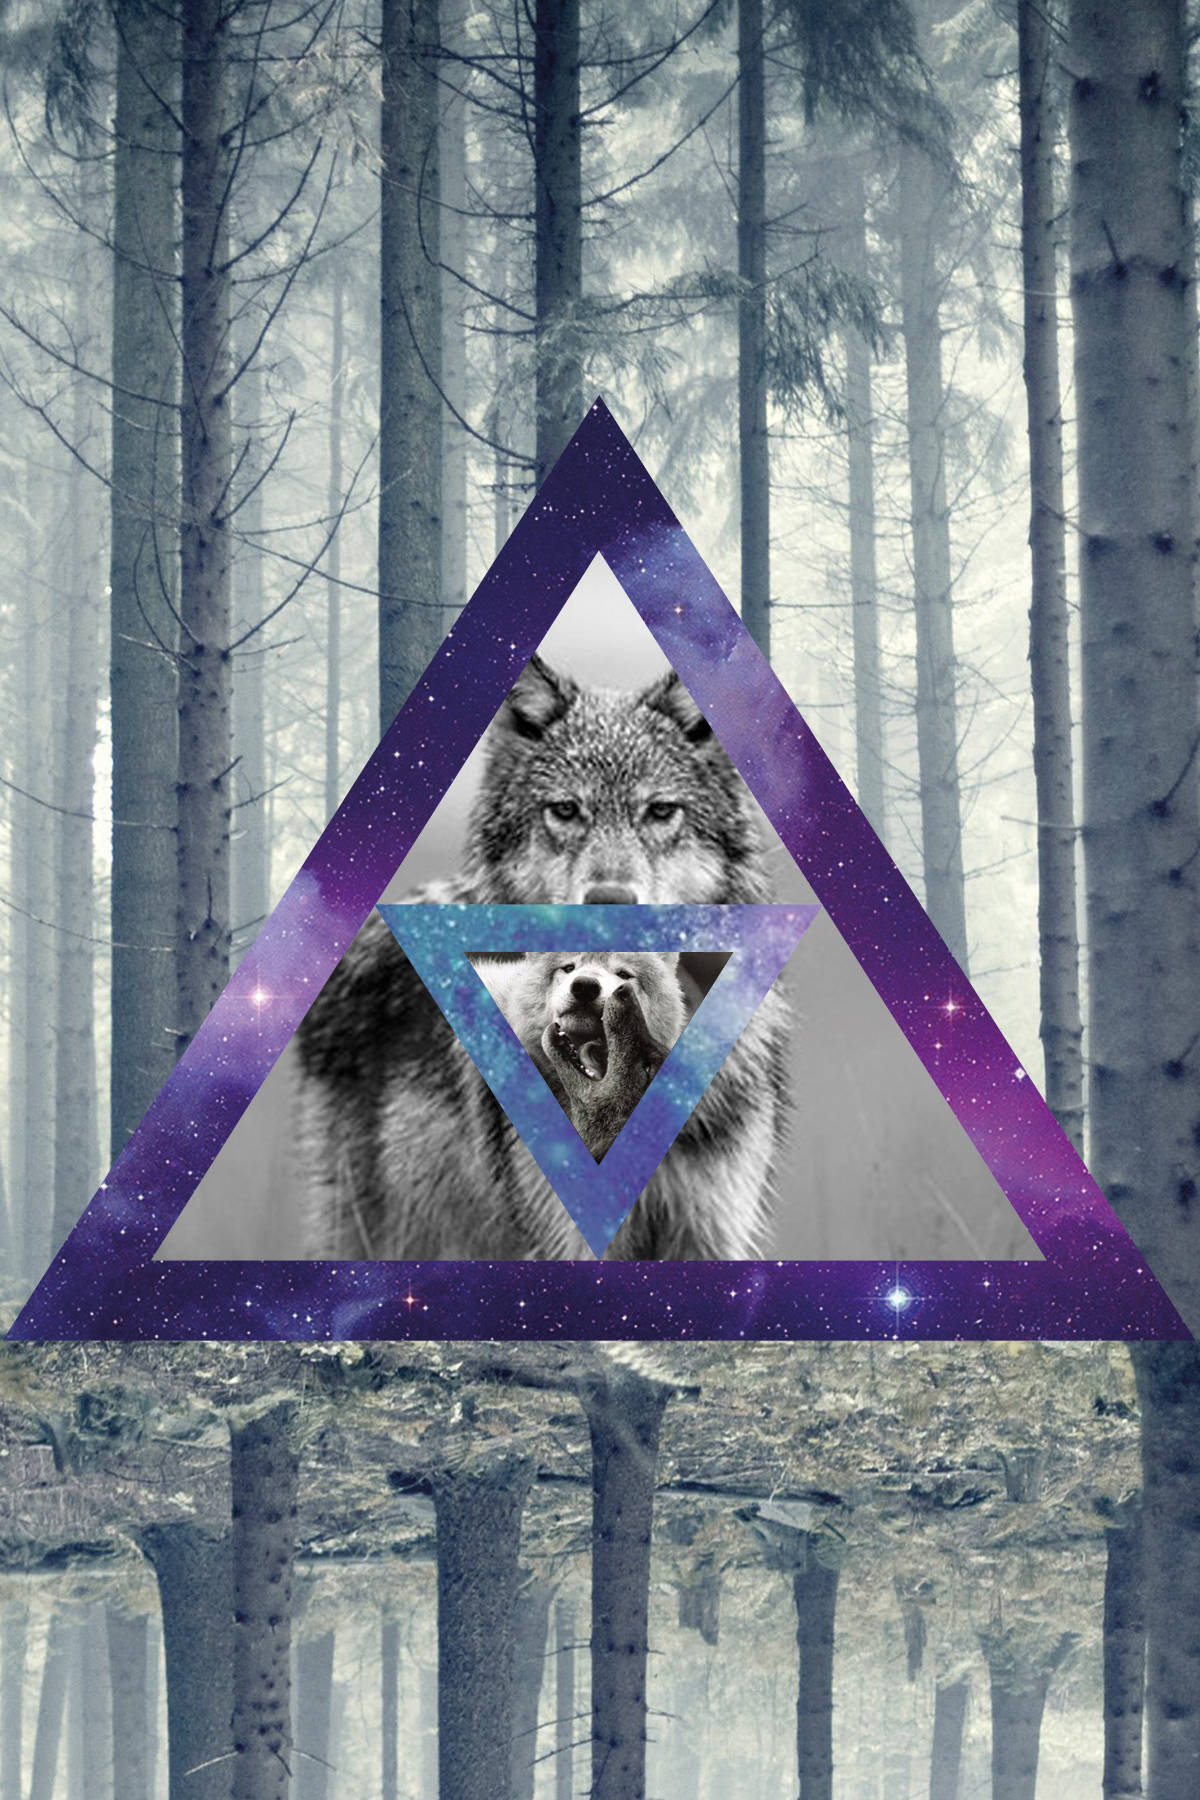 Cool Triangle Galaxy Graphic With Wolf